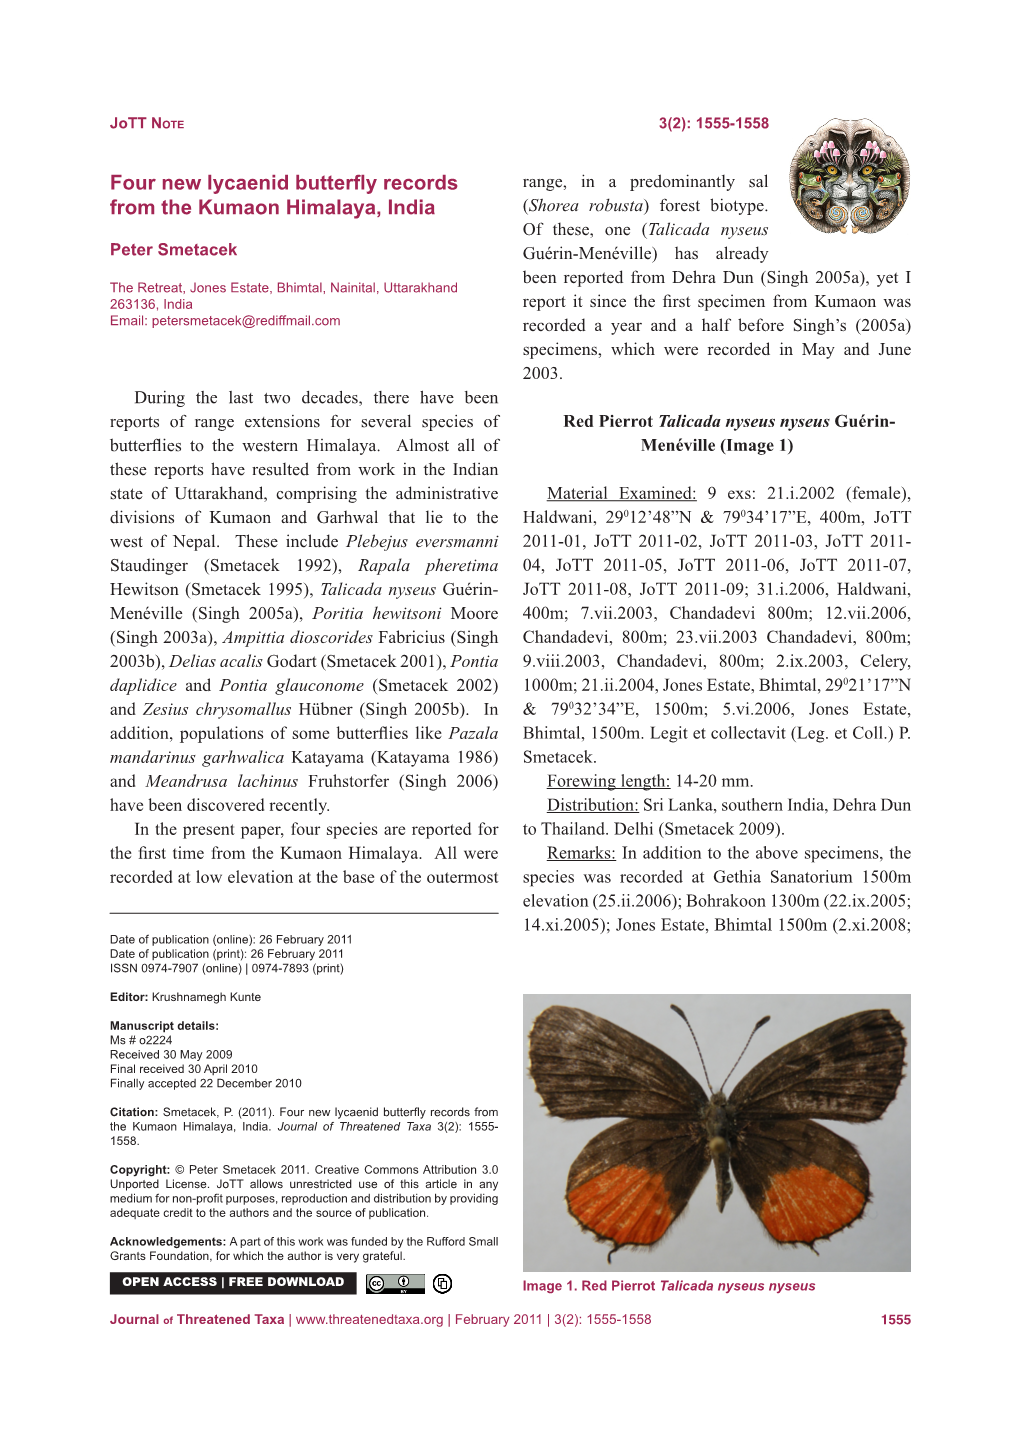 Four New Lycaenid Butterfly Records from the Kumaon Himalaya, India